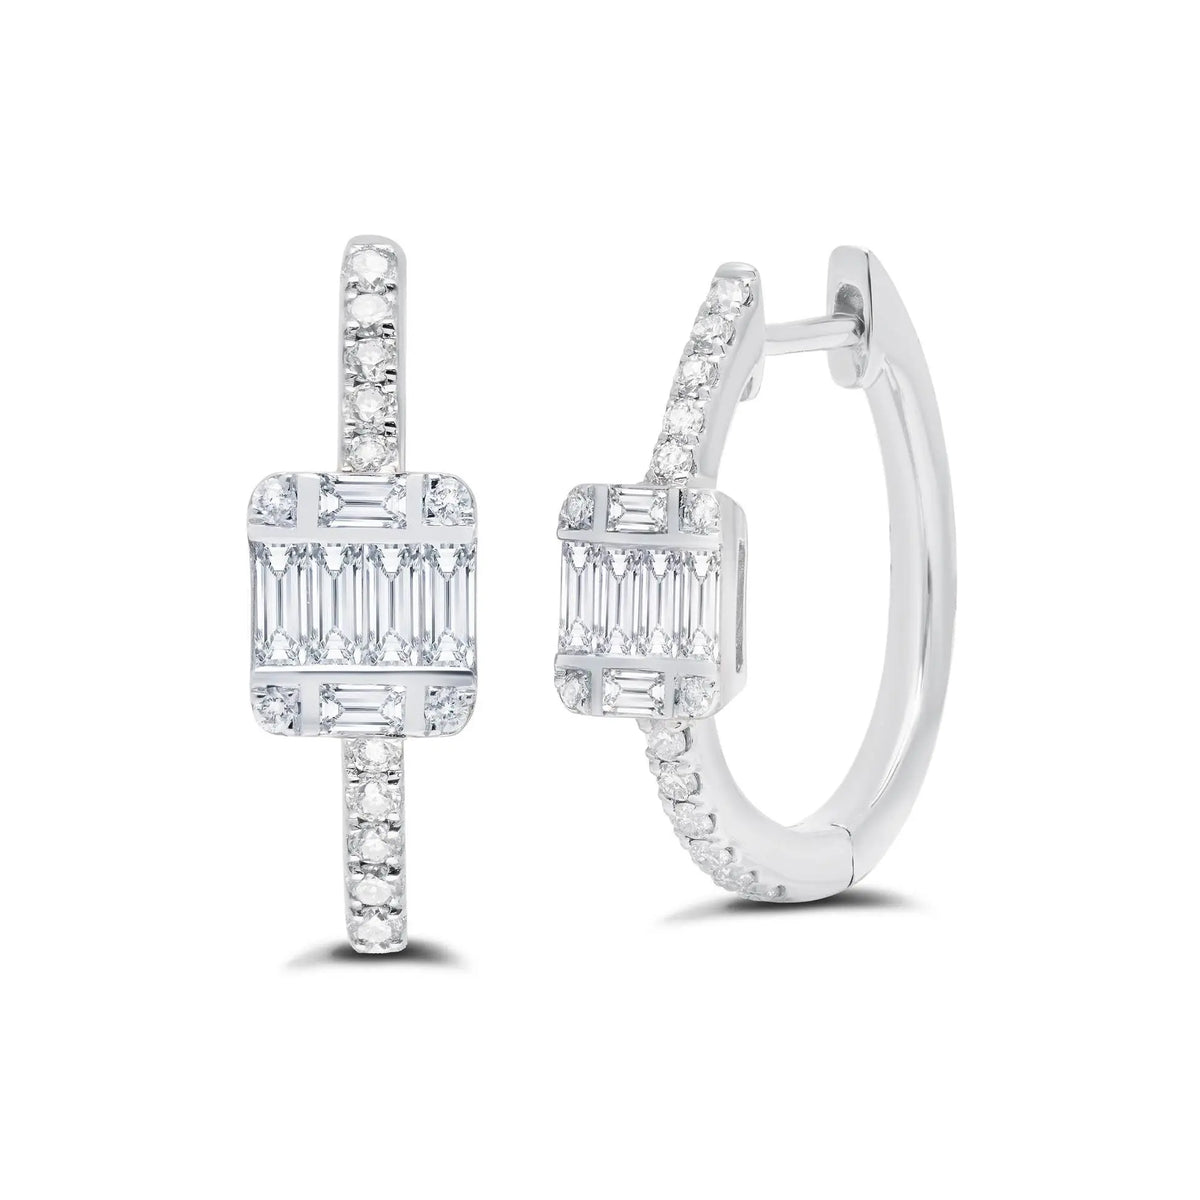 White Ascension Huggie Diamond Earrings  Details:  .39 Carats of G-H Color  Post &amp; Latch Back If an item is out of stock, please allow 4-6 weeks for delivery